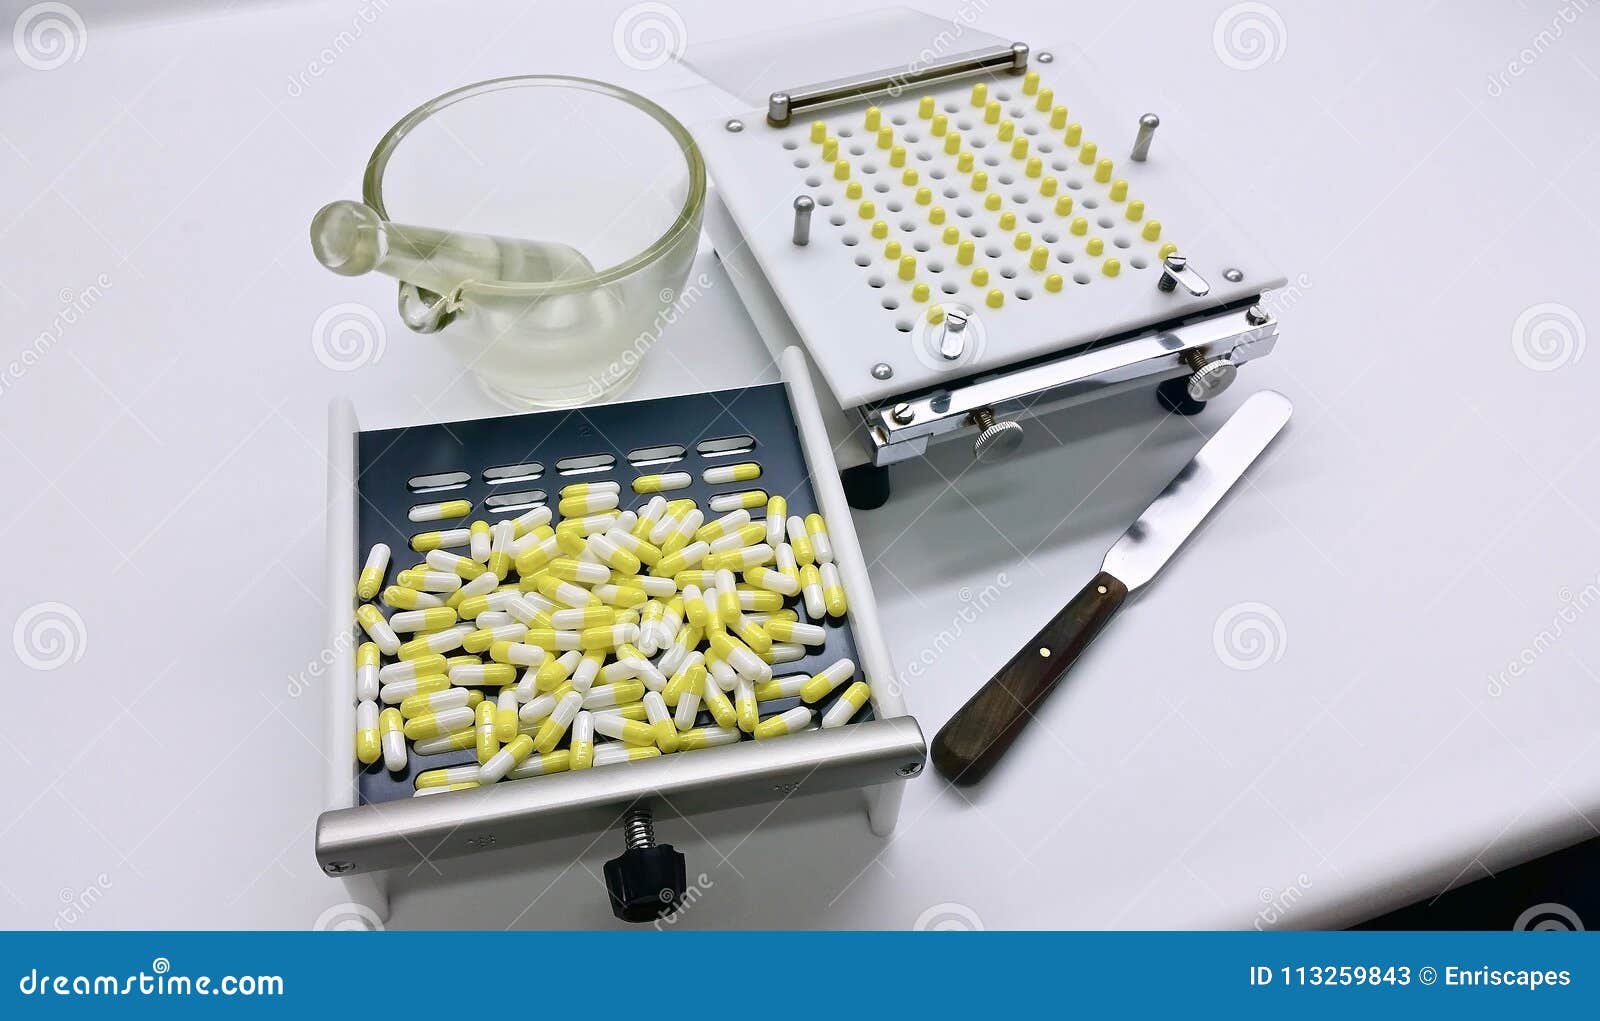 capsules compounding in the pharmacy laboratory